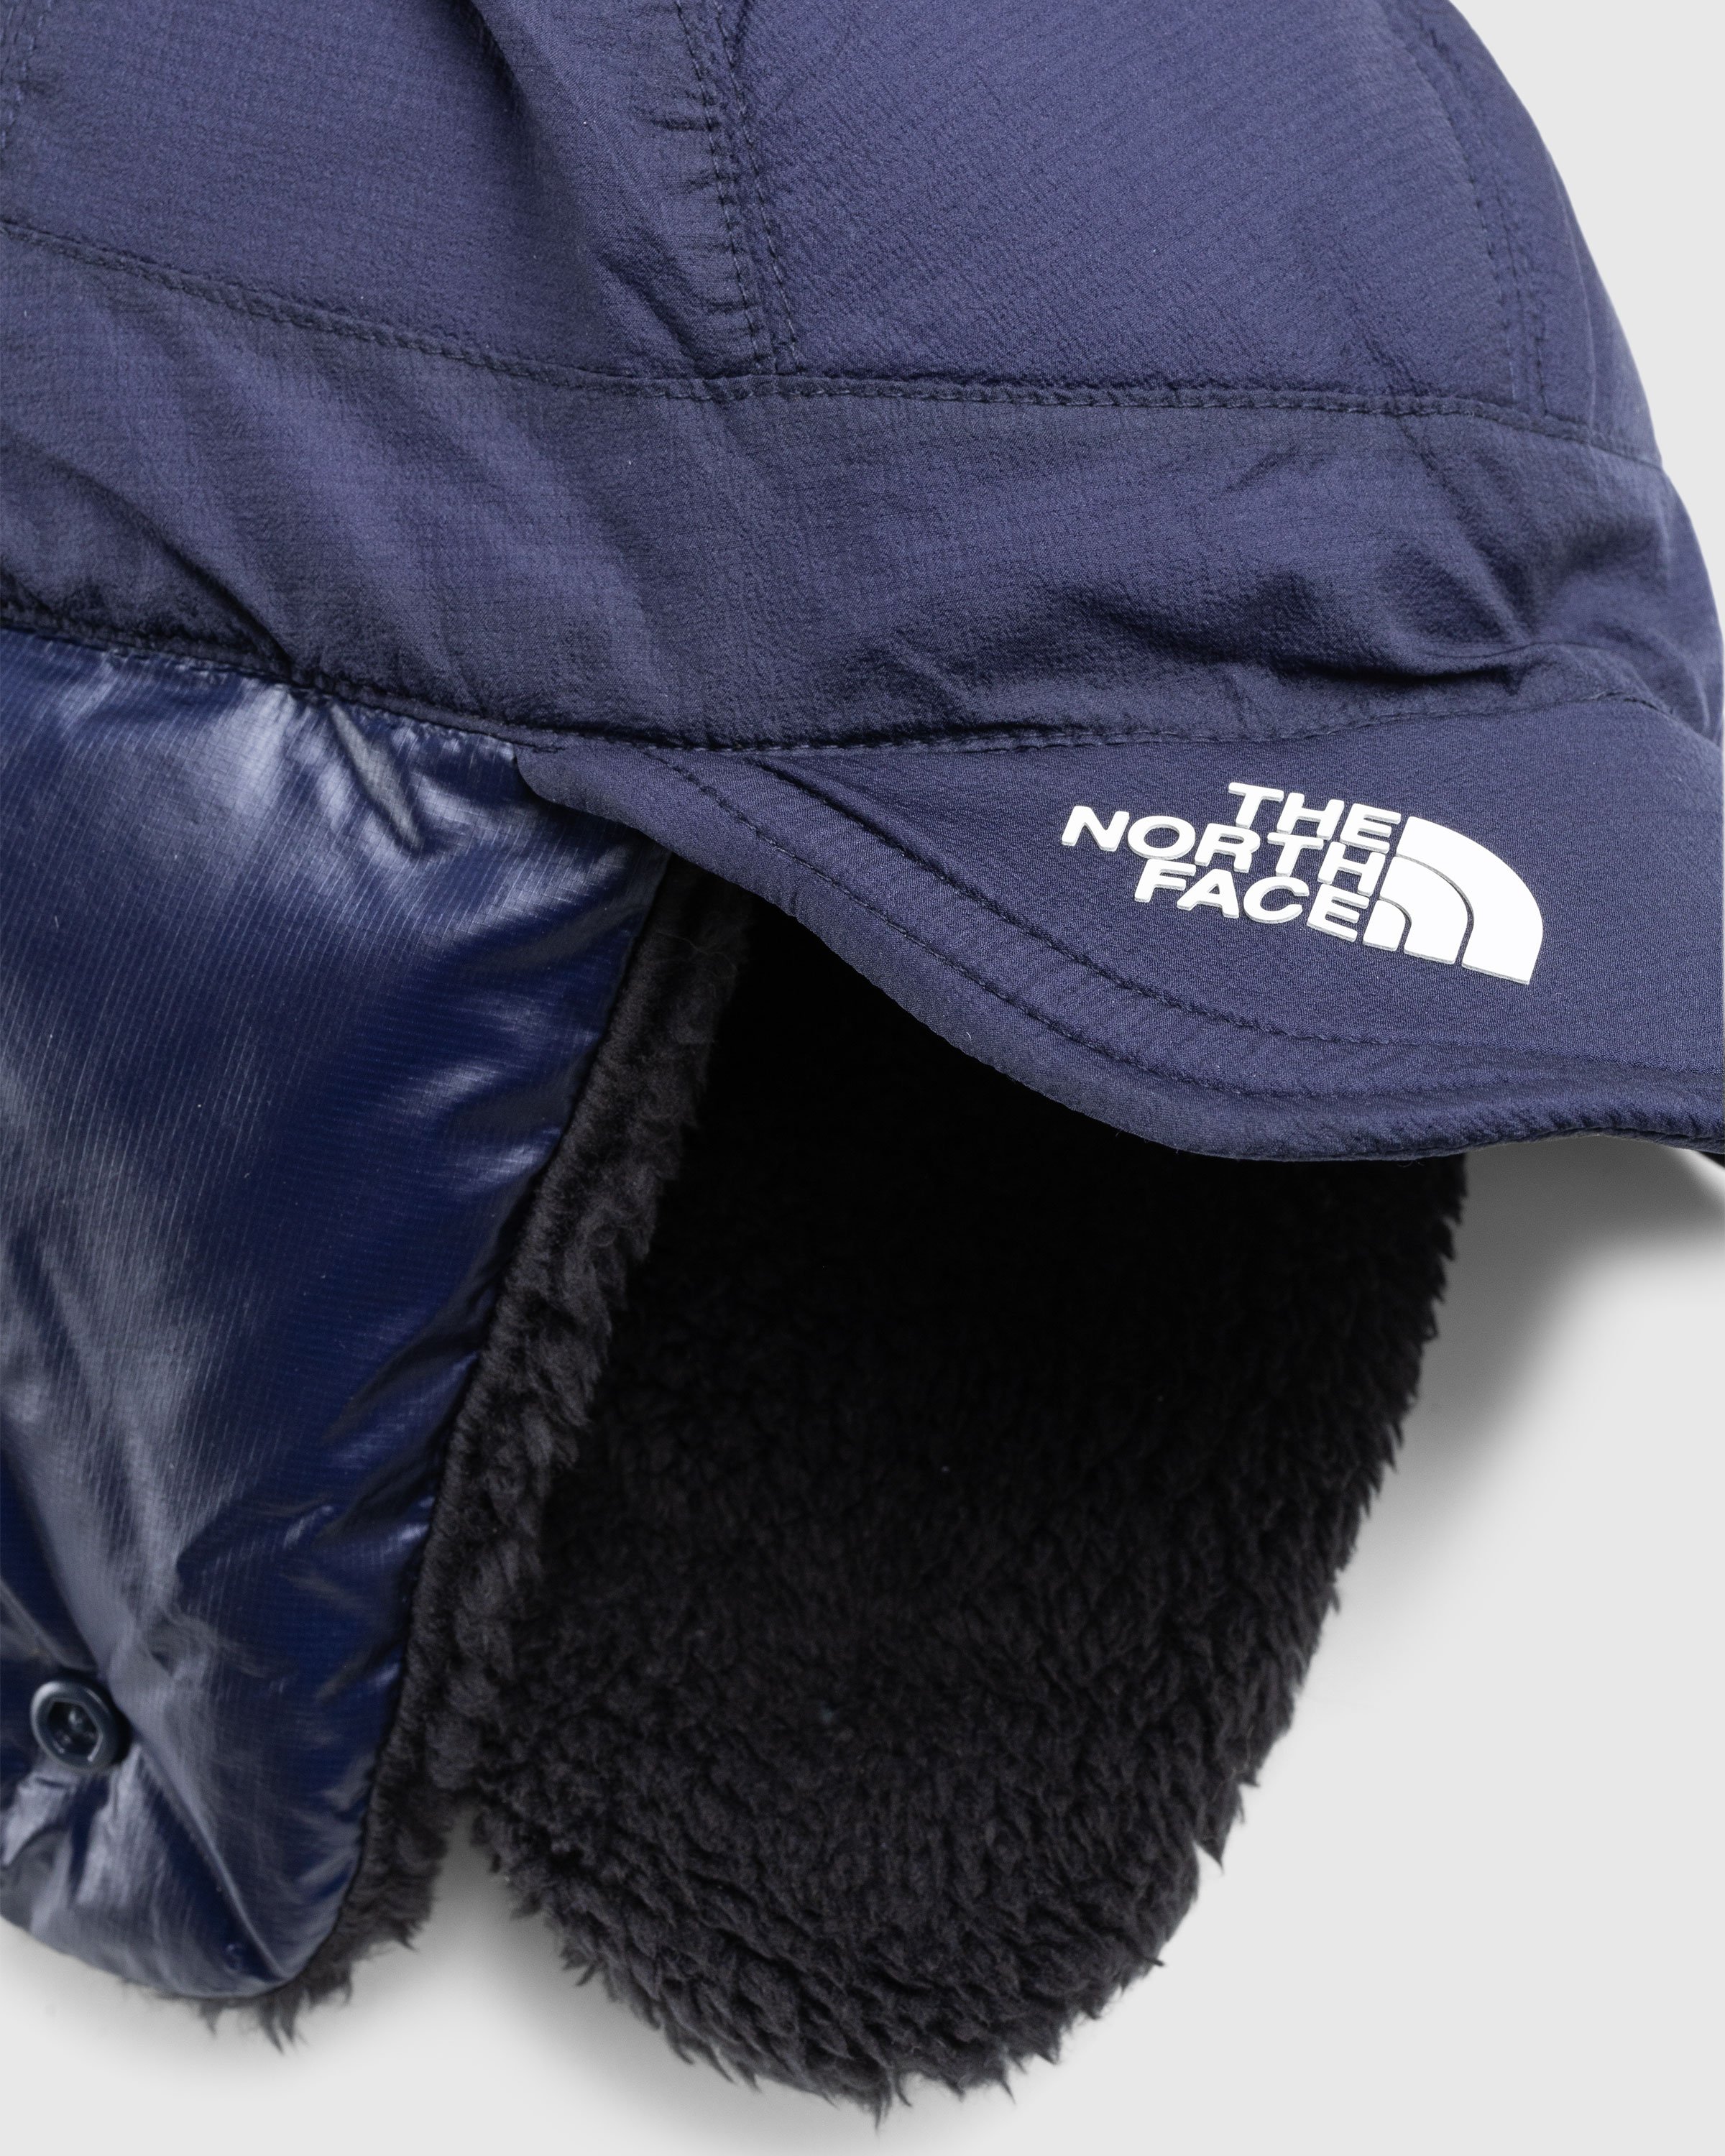 The North Face x UNDERCOVER - Soukuu Down Cap Black/Navy - Accessories - Multi - Image 5